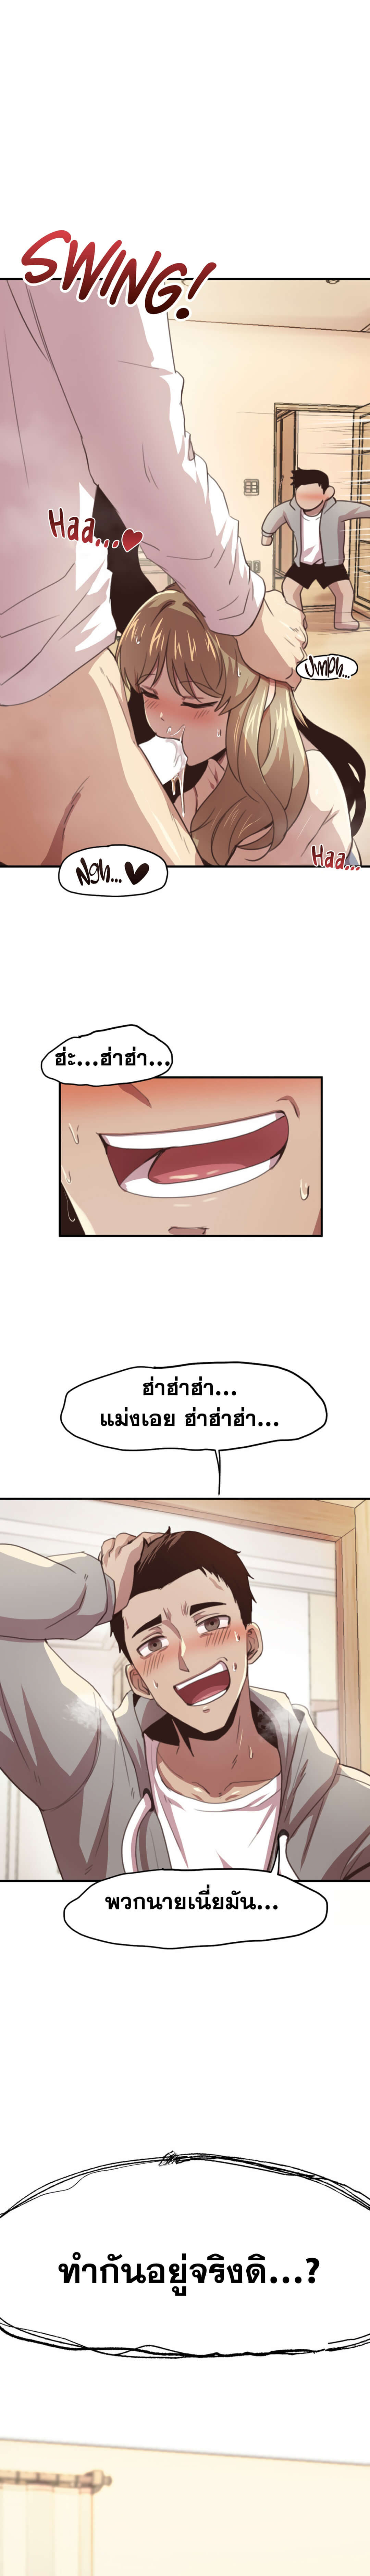 With My Brother’s Friends ตอนที่ 3 ภาพ 16